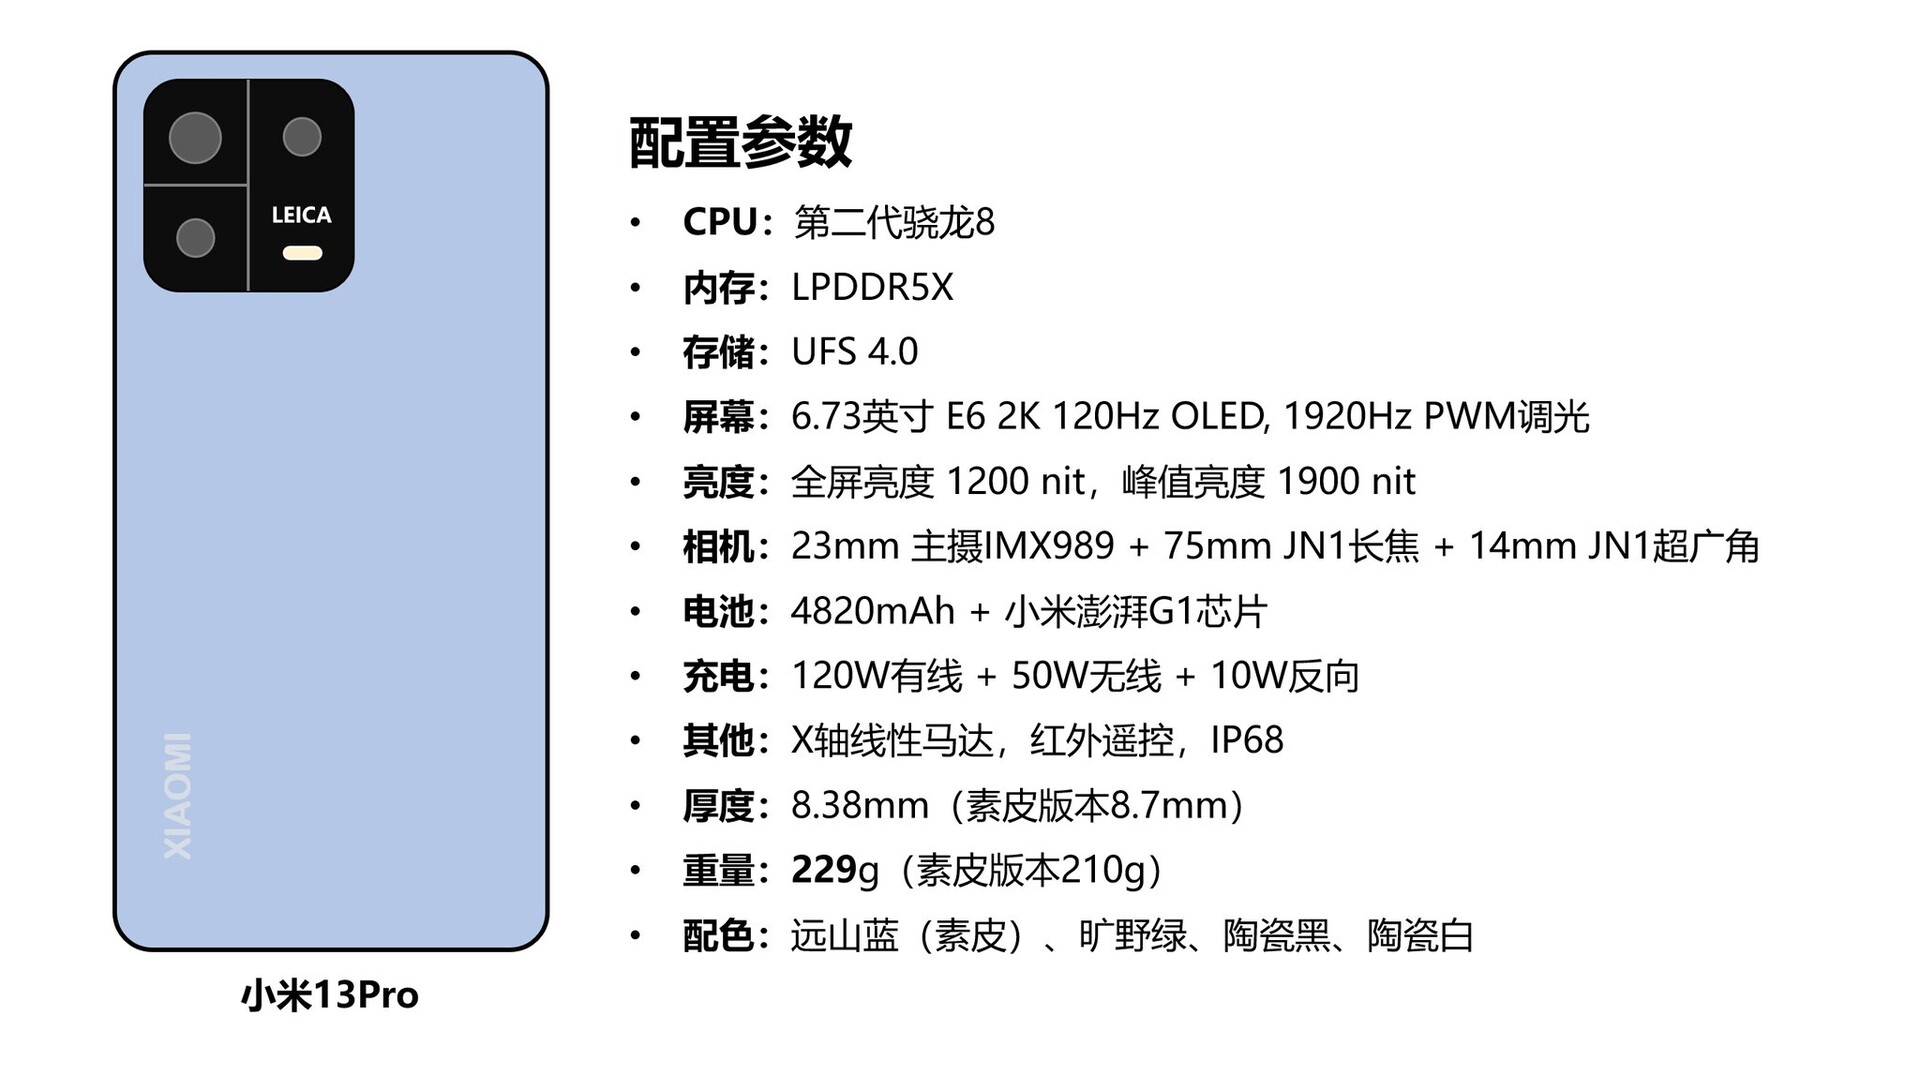 Xiaomi 13 - Full phone specifications